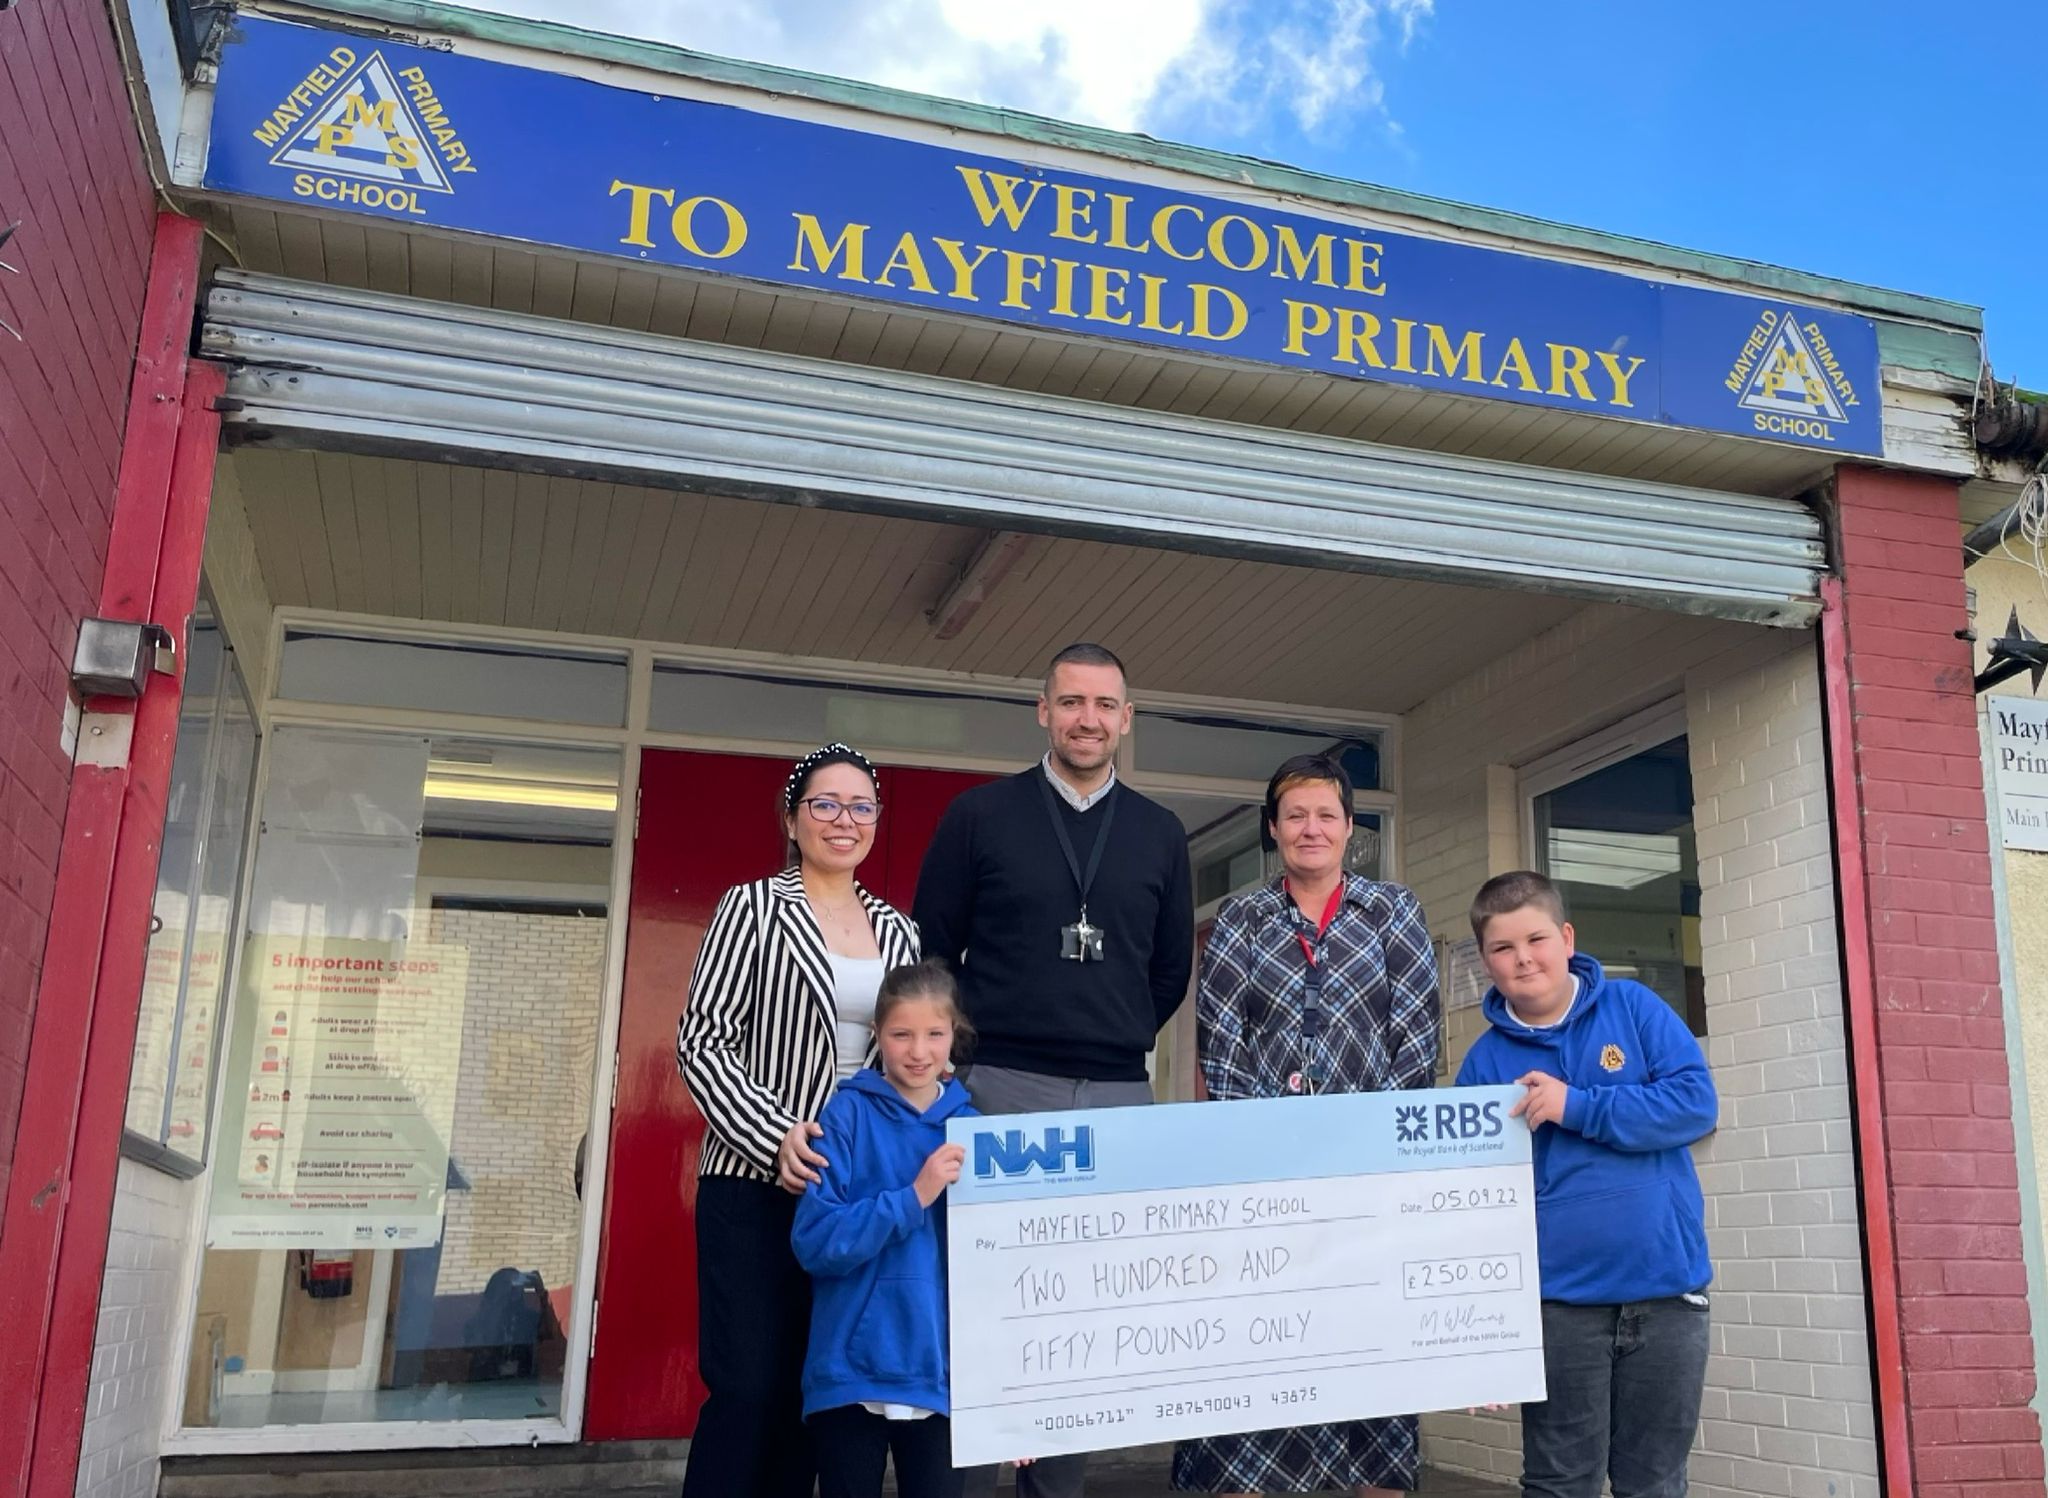 The NWH Group support the children of Mayfield Primary